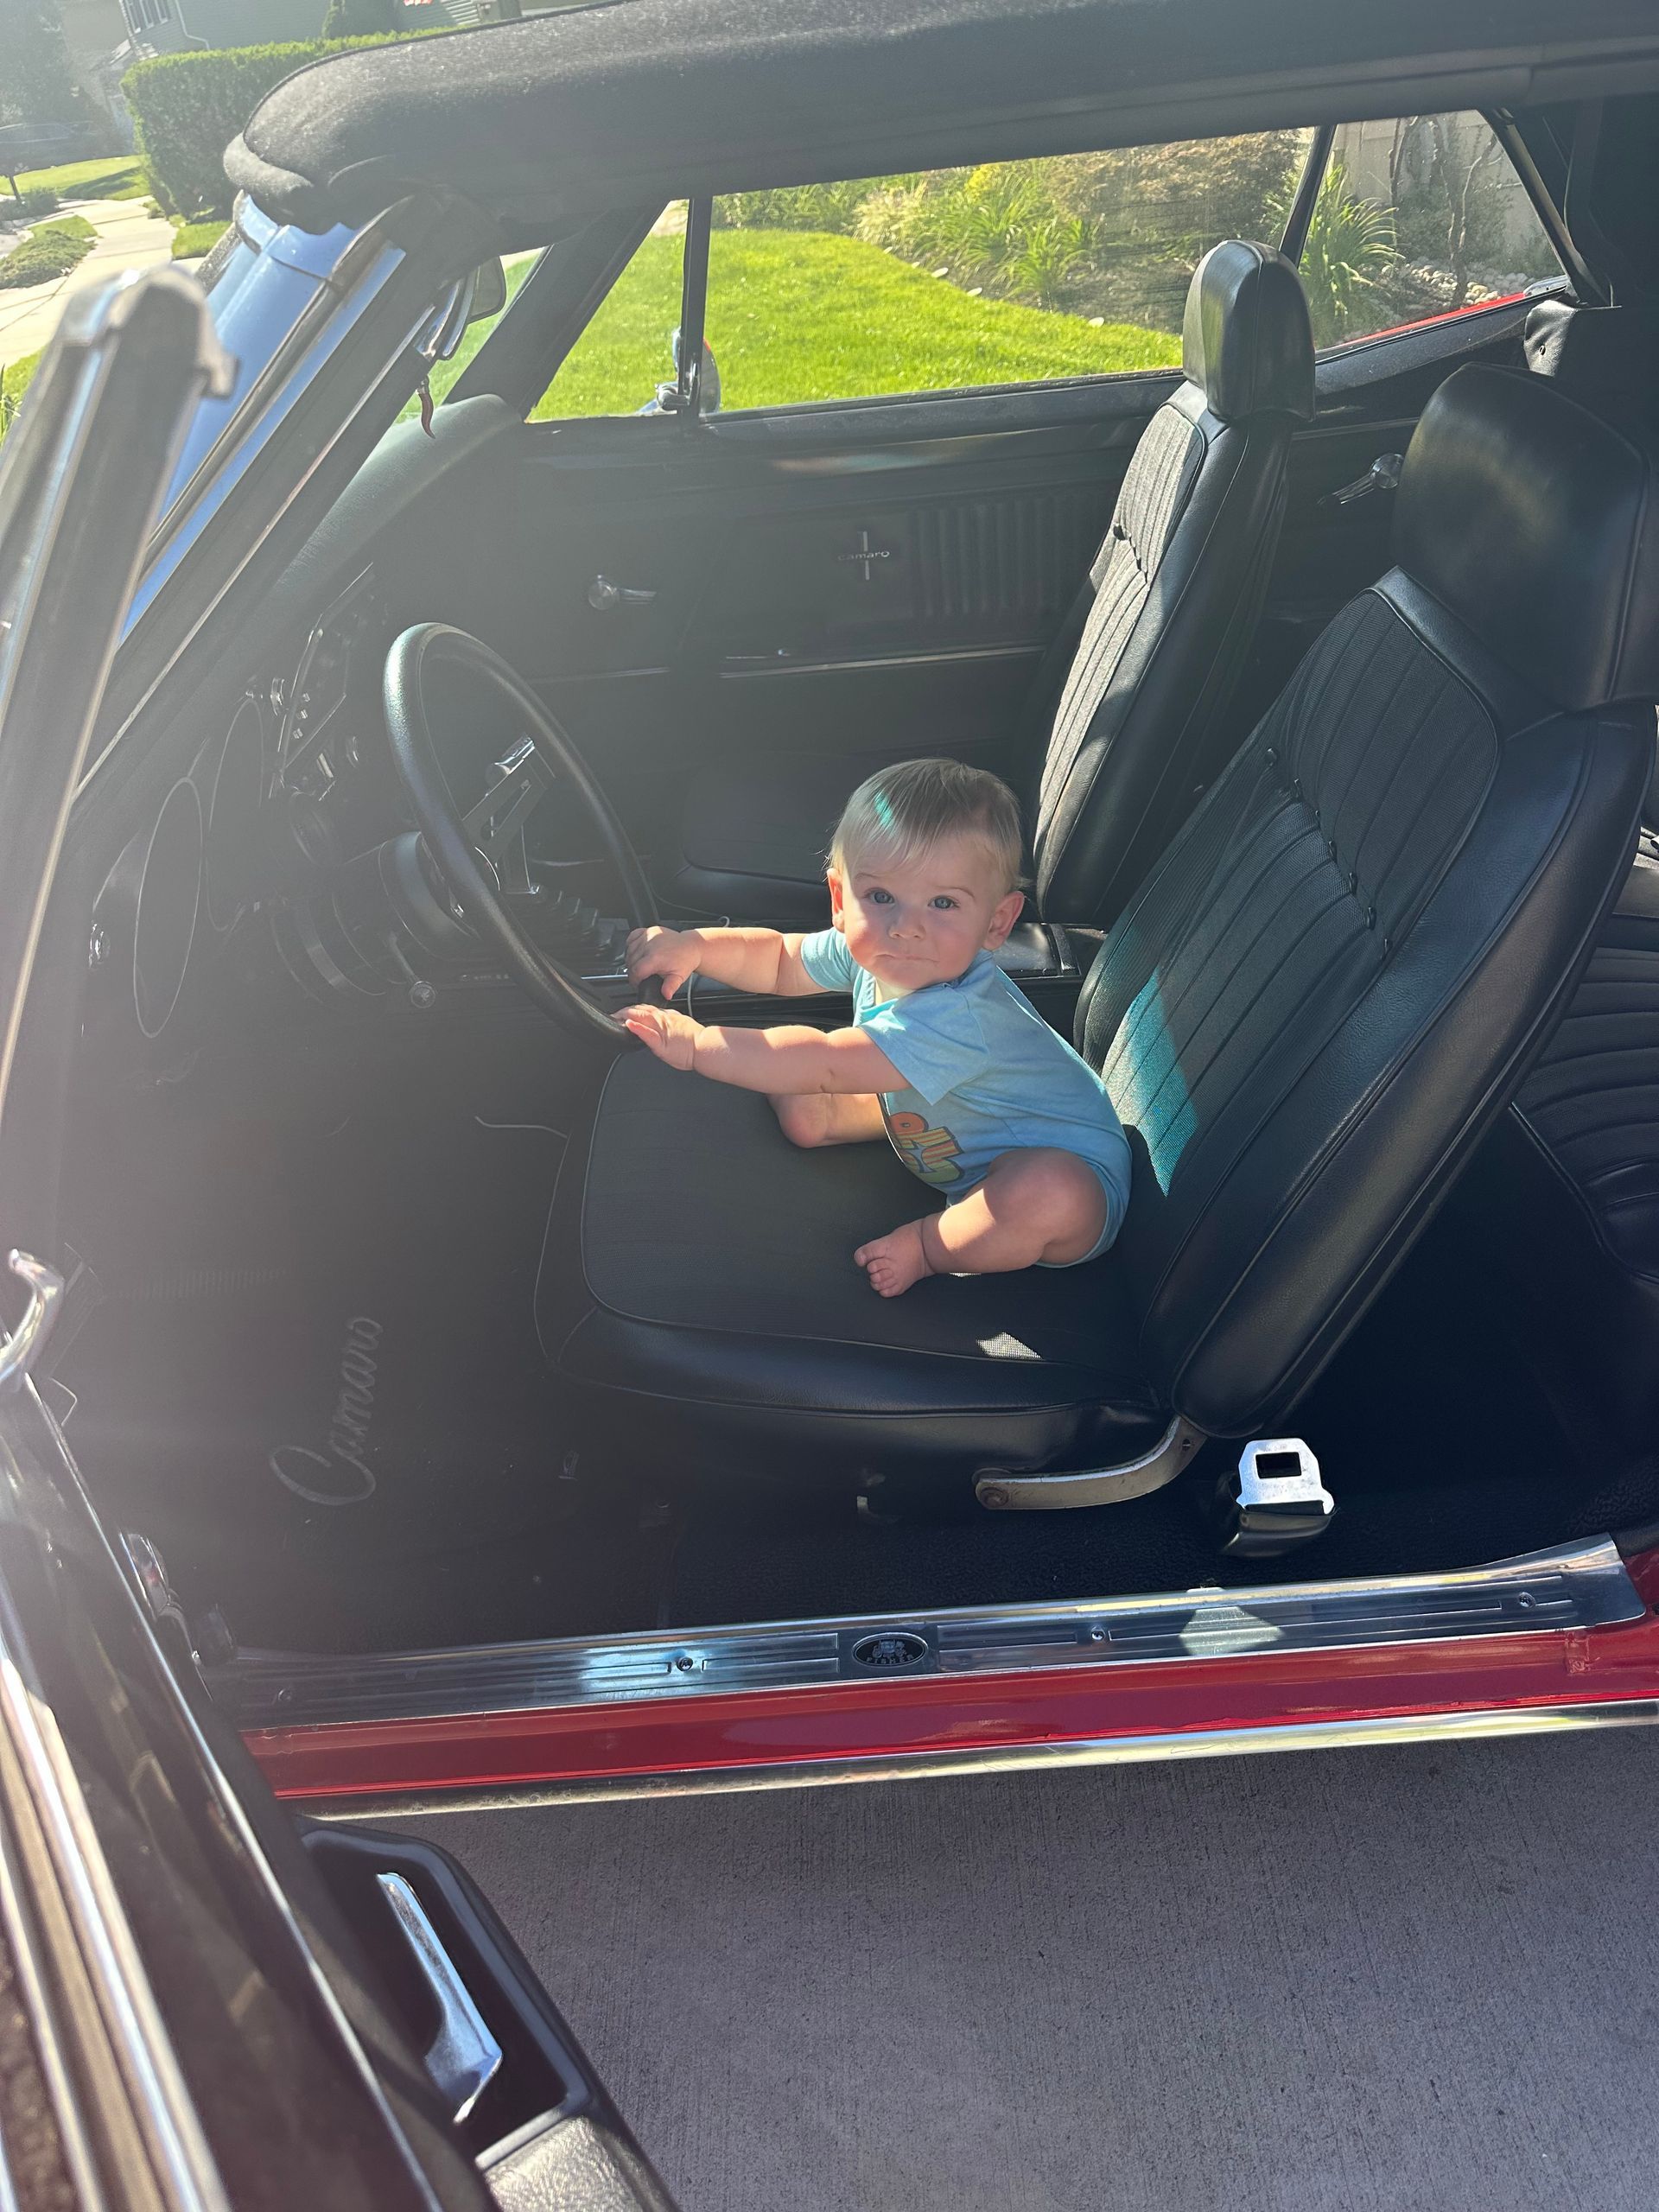 a baby is sitting in the driver 's seat of a red camaro